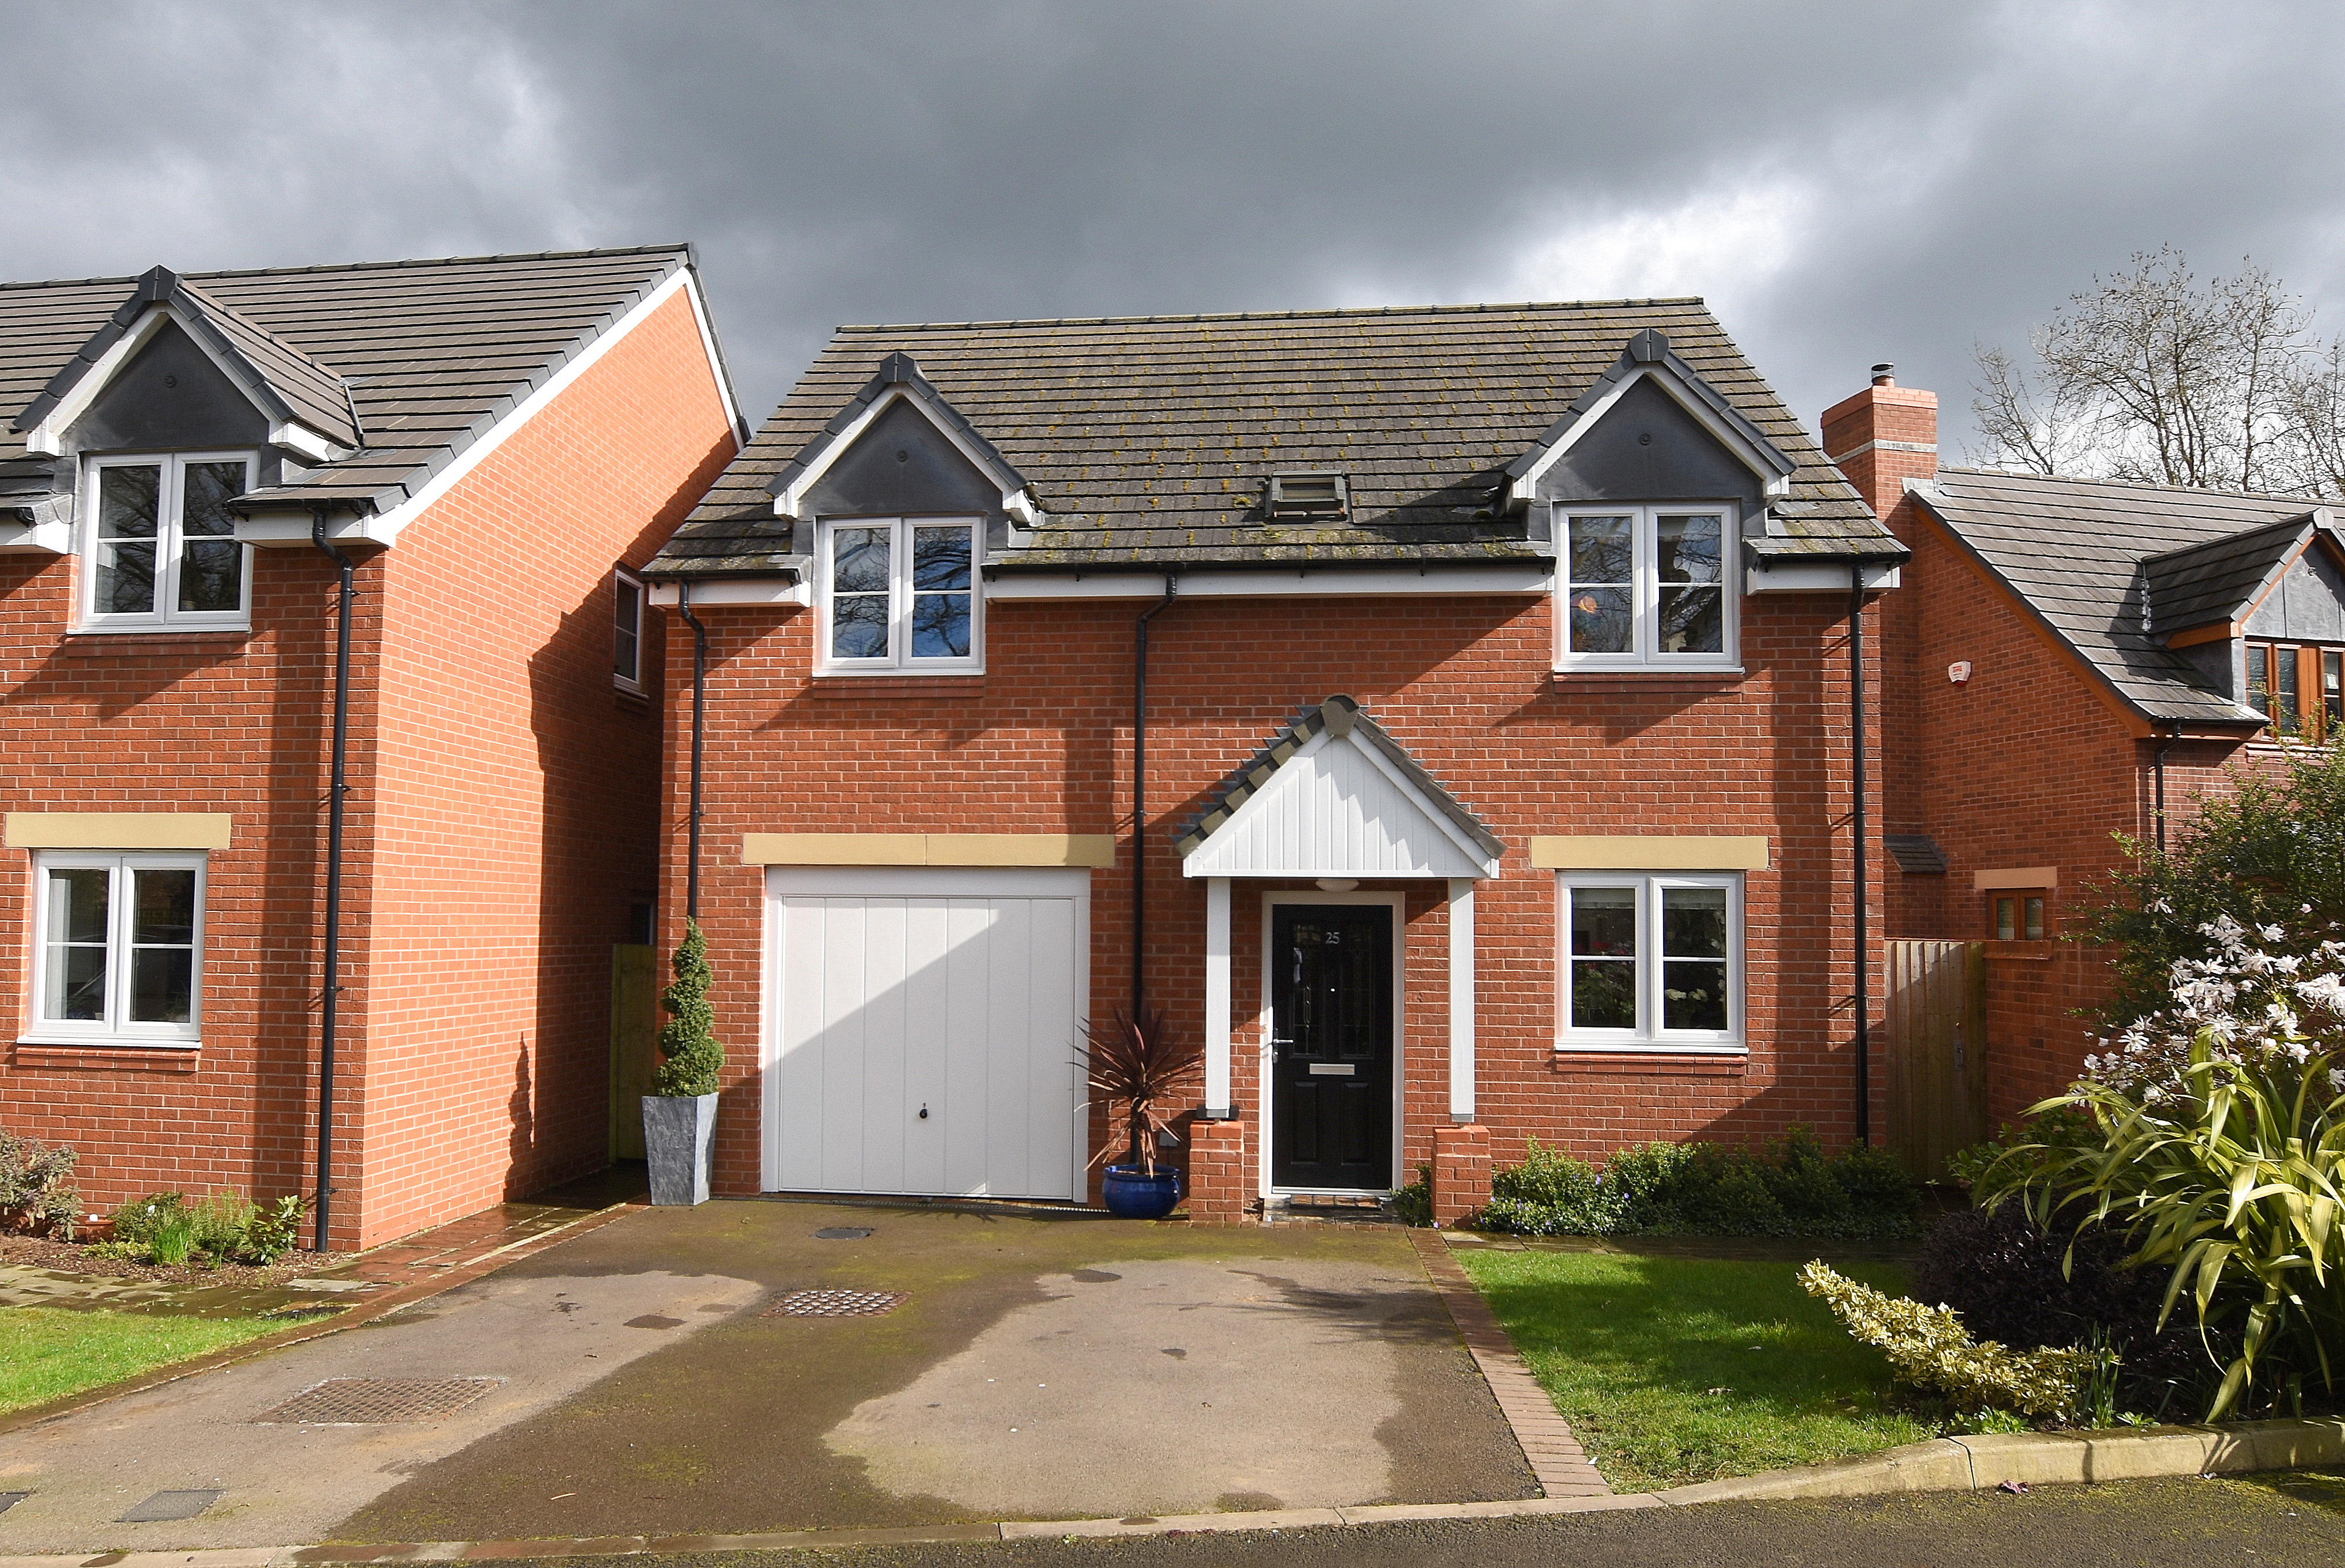 4 bed  for sale in The Grange, Banbury 0